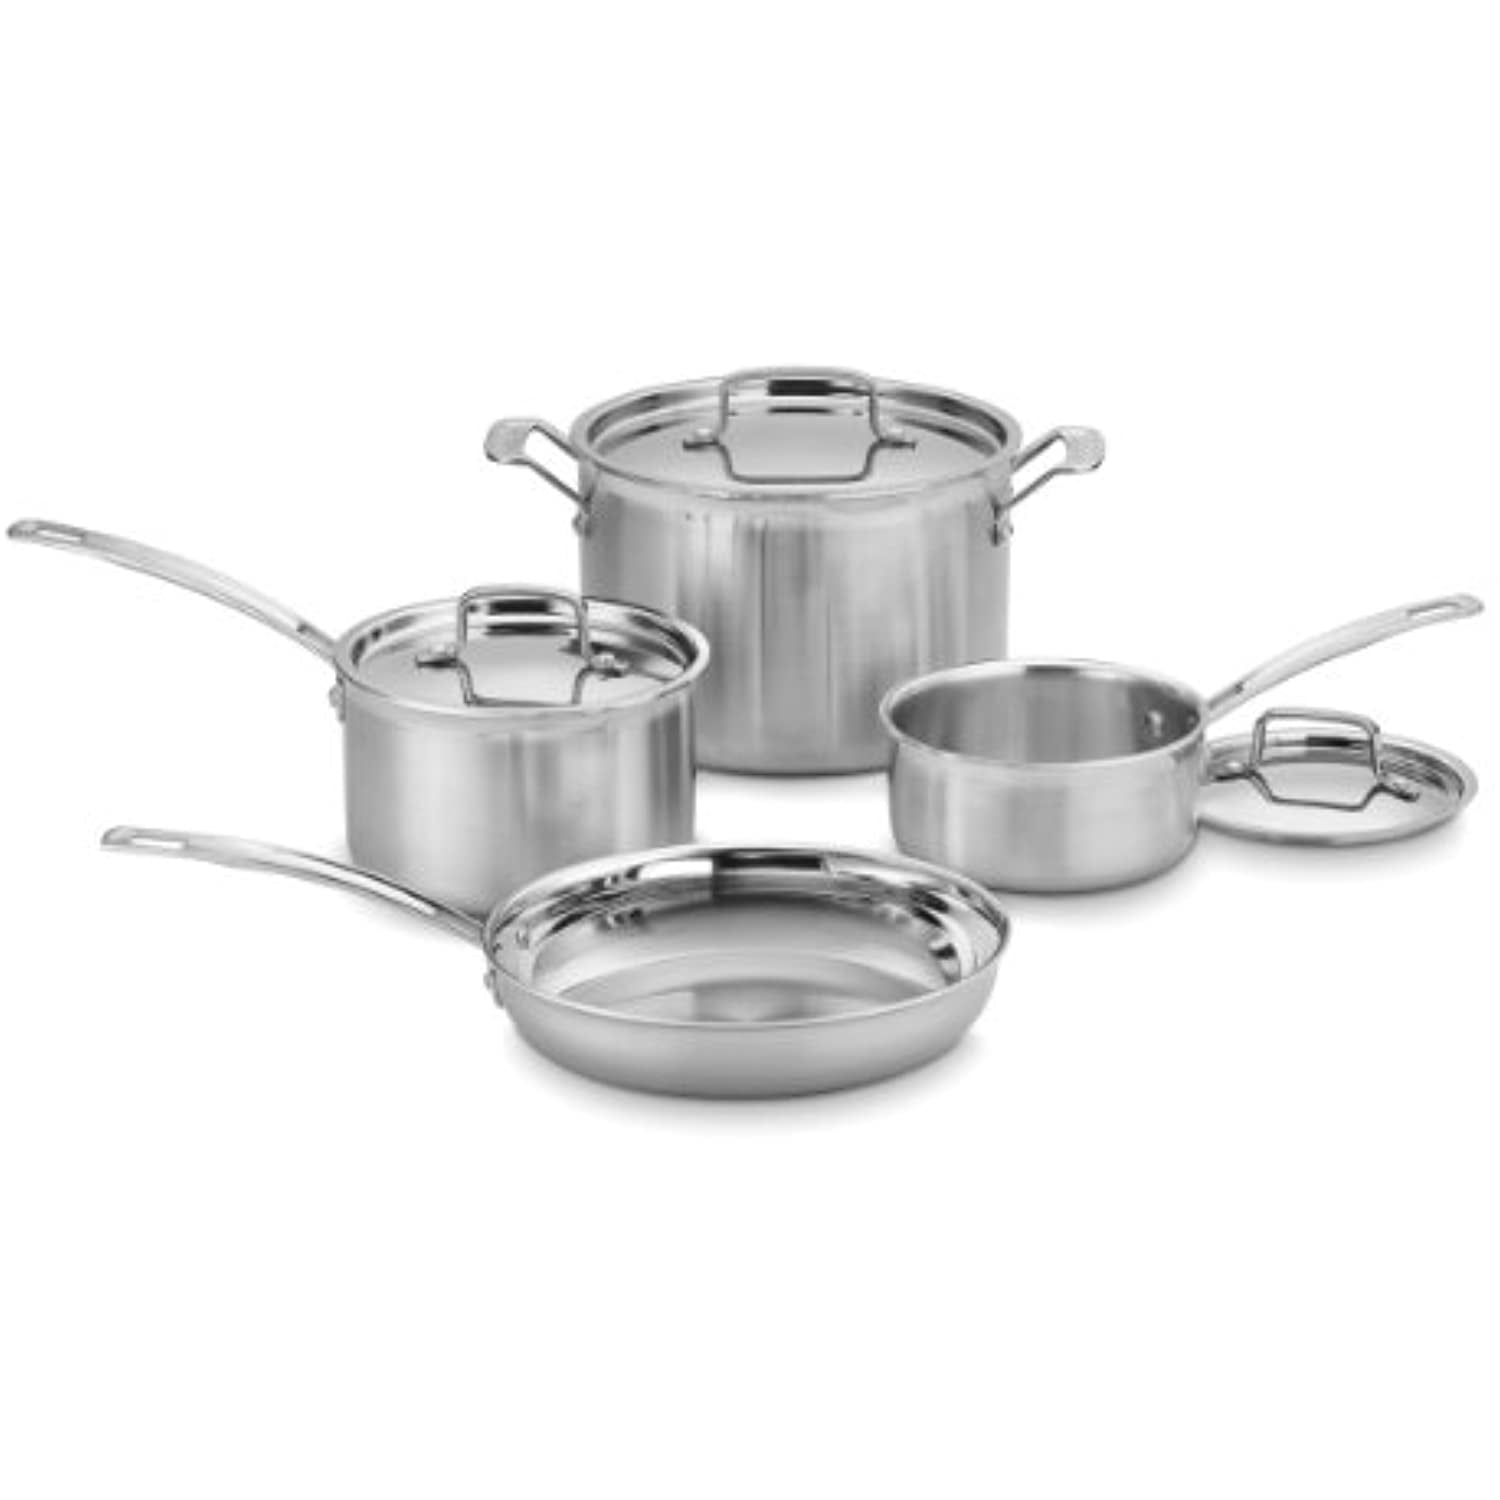  Cuisinart MCP-13 MultiClad Pro Stainless-Steel Cookware 13-Piece  Cookware Set, Silver: Home & Kitchen